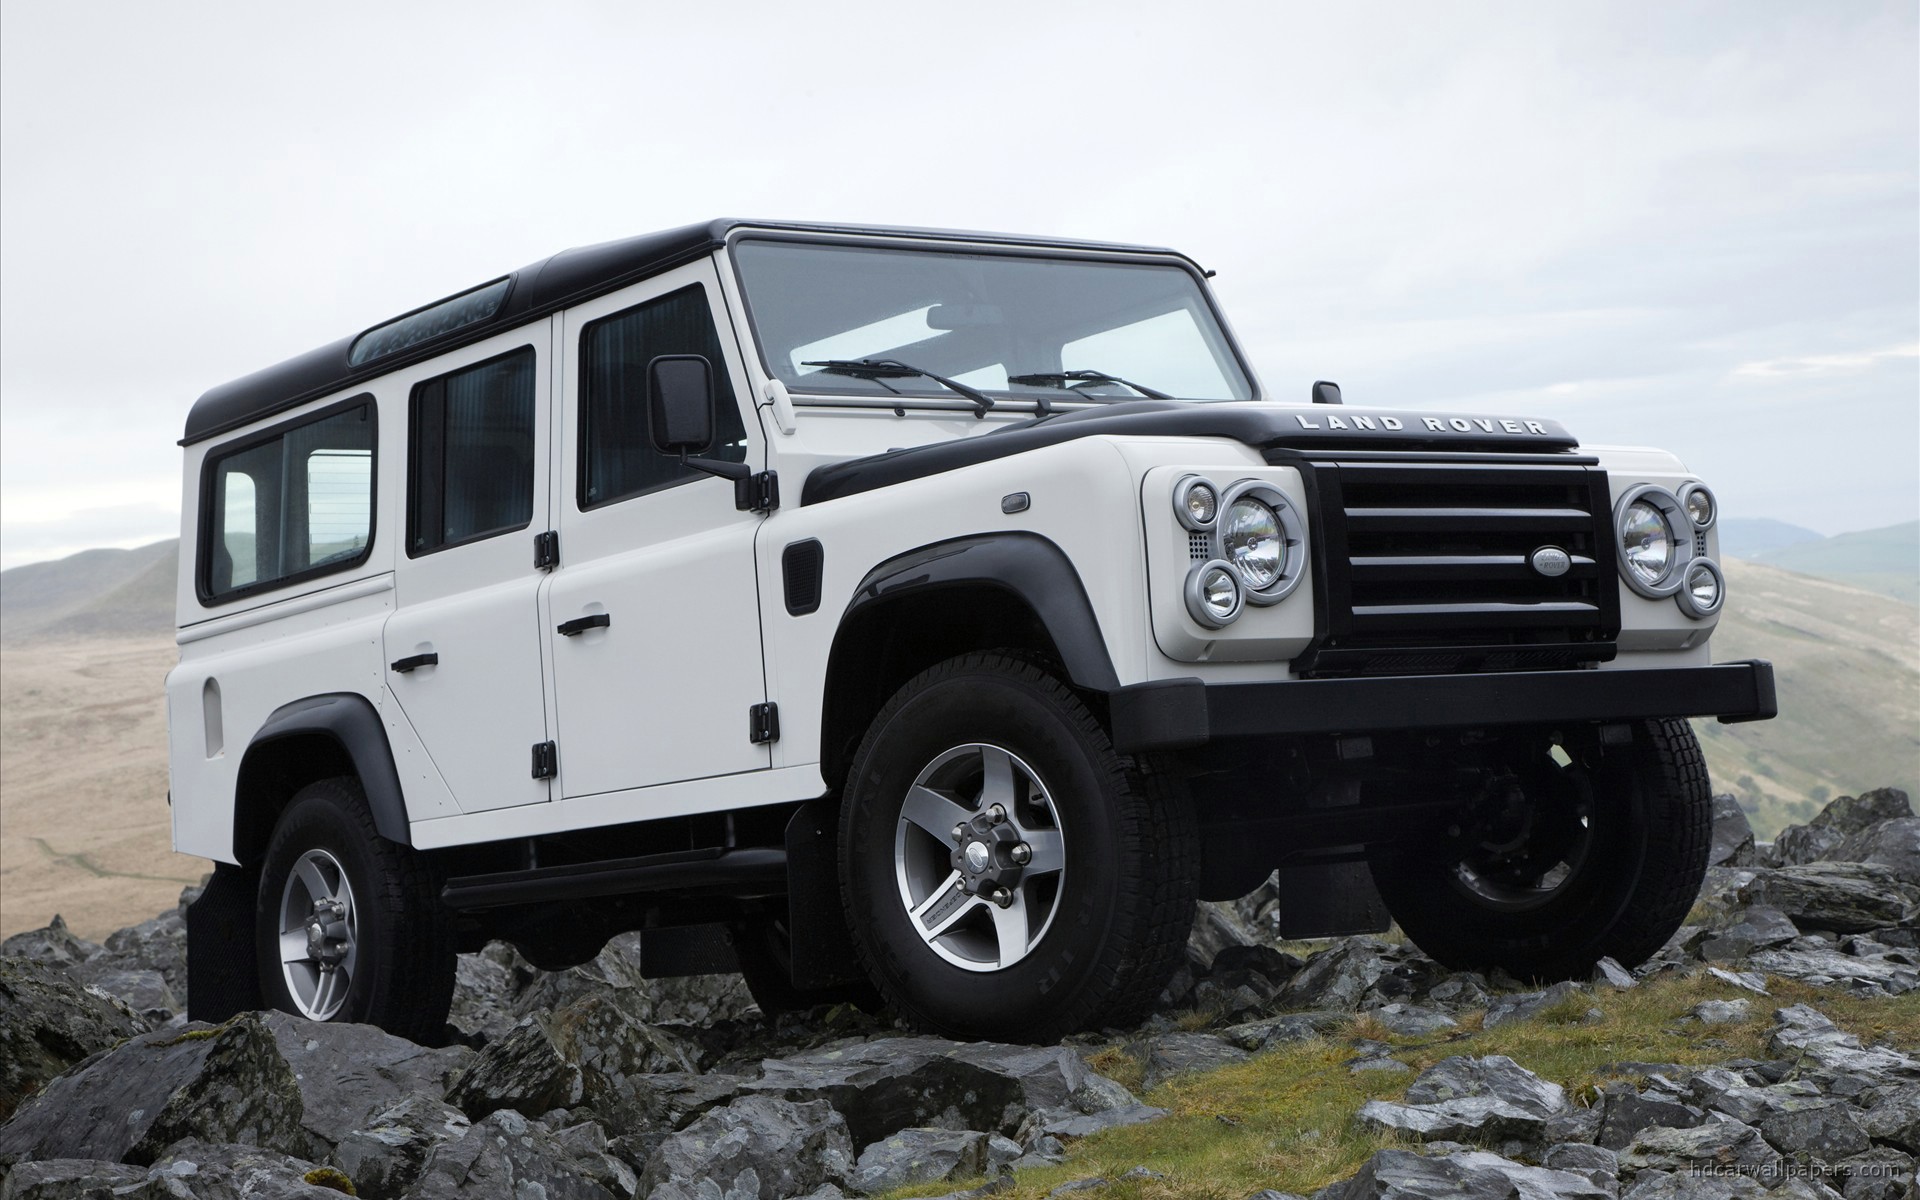 The Necessity Of Genuine And Original Land Rover Parts During Maintenance And Repair